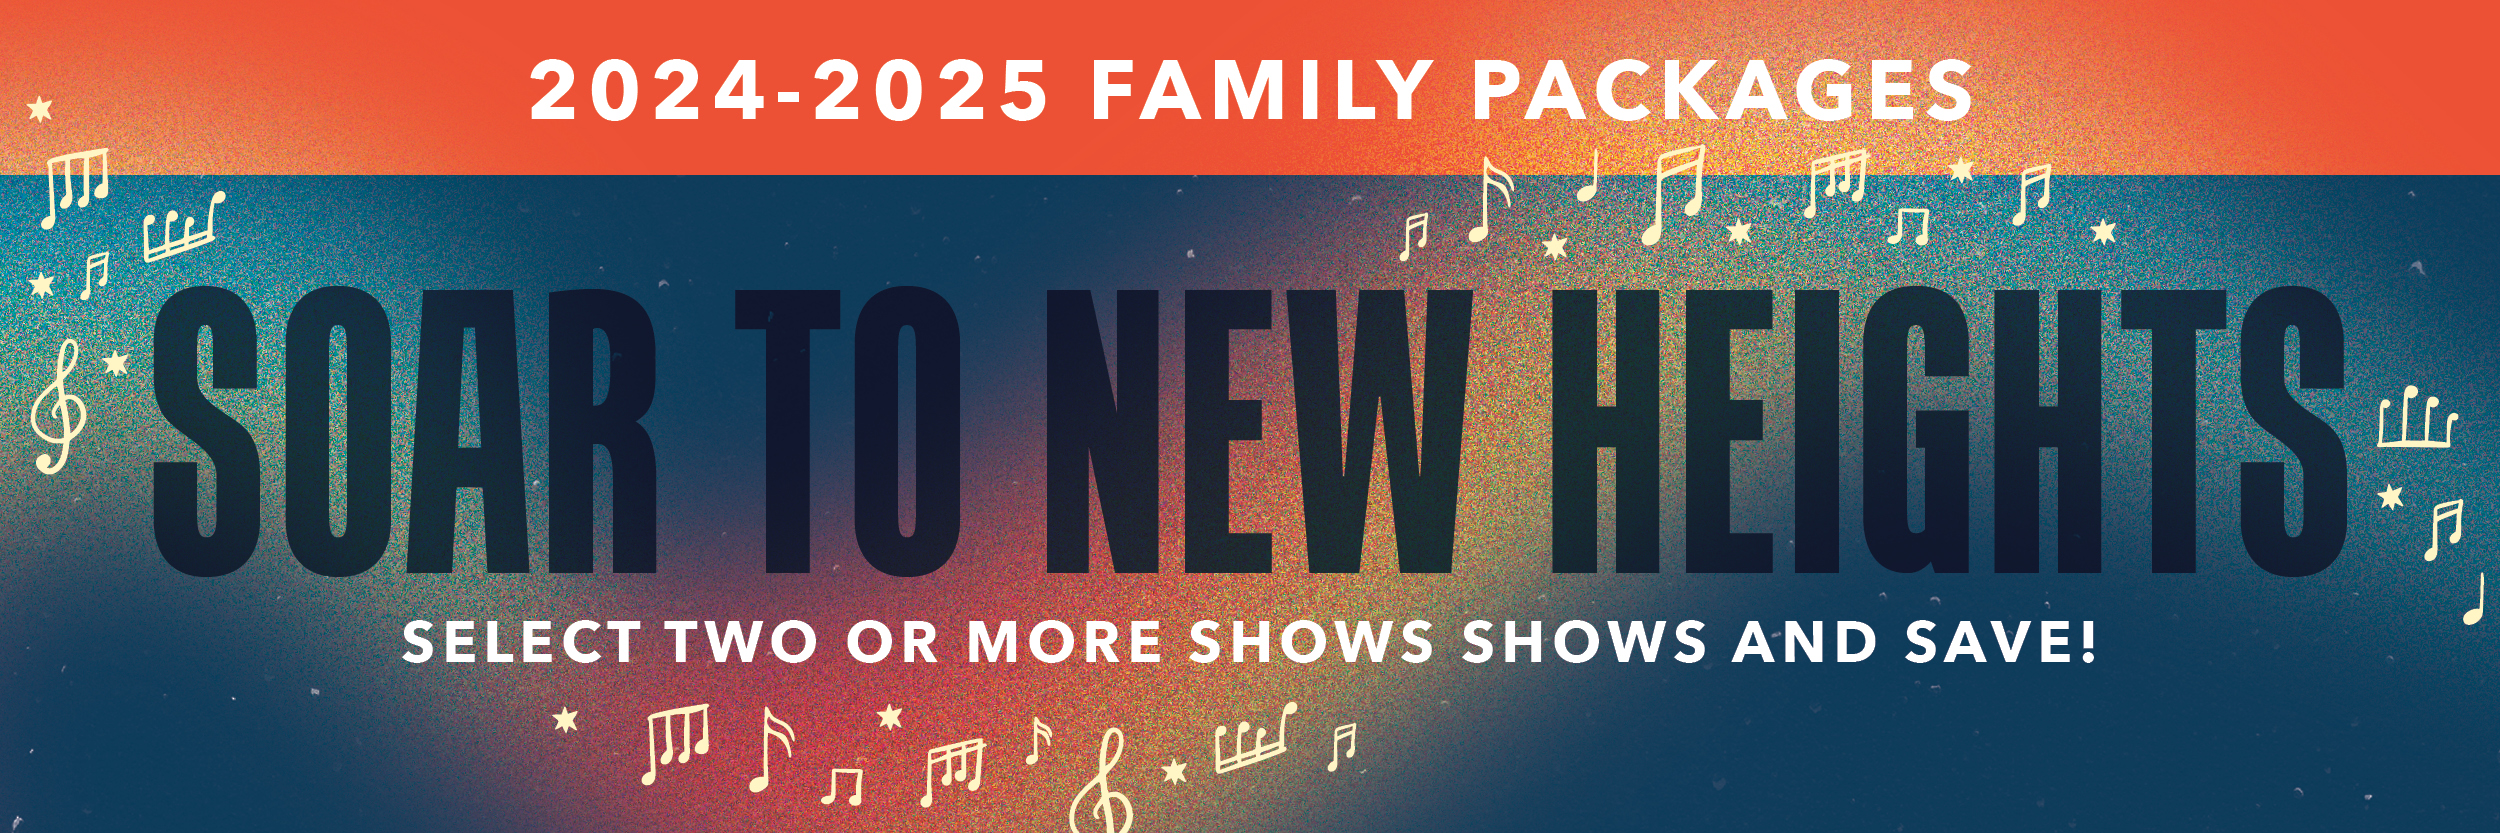 2024-2025 Season of Plays Family Packages